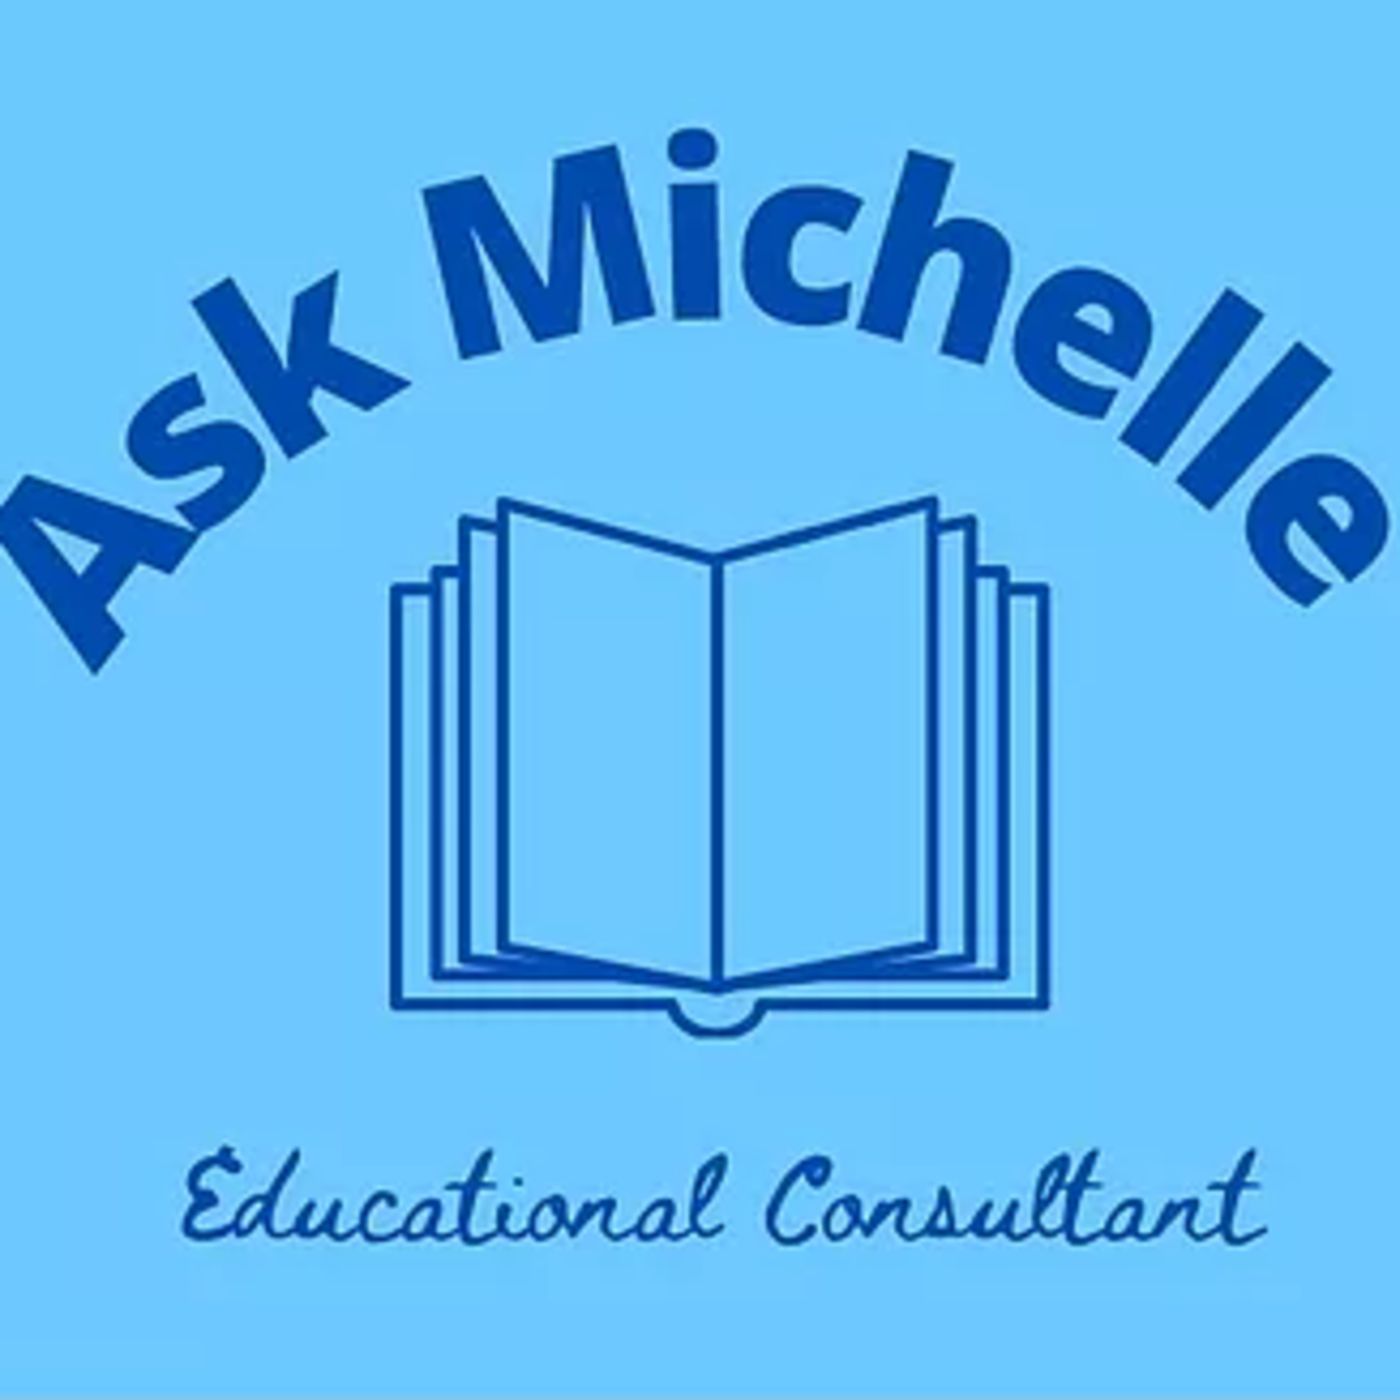 Pirate Podcast Takeover! with AskMichelleS.com